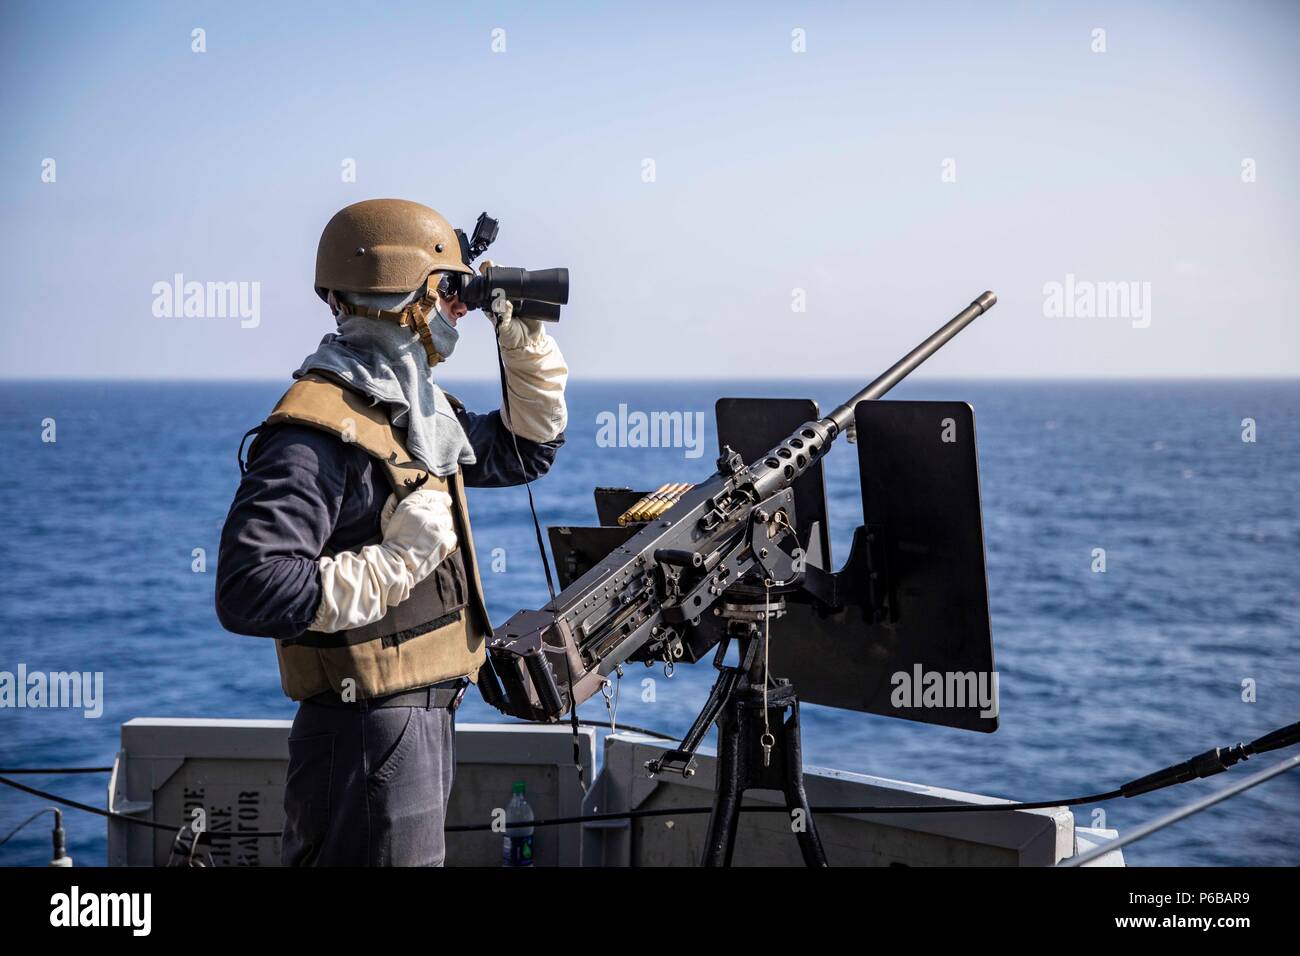 180623-N-KW492-0021 ATLANTIC OCEAN (June 23, 2018) Aviation Ordnanceman 3rd Class Alex Blanco scans for surface contacts during an integrated live-fire weapons exercise aboard the Wasp-class amphibious assault ship USS Kearsarge (LHD 3) as part of Surface Warfare Advanced Tactical Training (SWATT). The Kearsarge Amphibious Ready Group is completing the Navy’s first East Coast SWATT exercise. SWATT is led by the Naval Surface and Mine Warfighting Development Center and is designed to increase warfighting proficiency, lethality, and interoperability of participating units. (U.S. Navy Photo by Ma Stock Photo